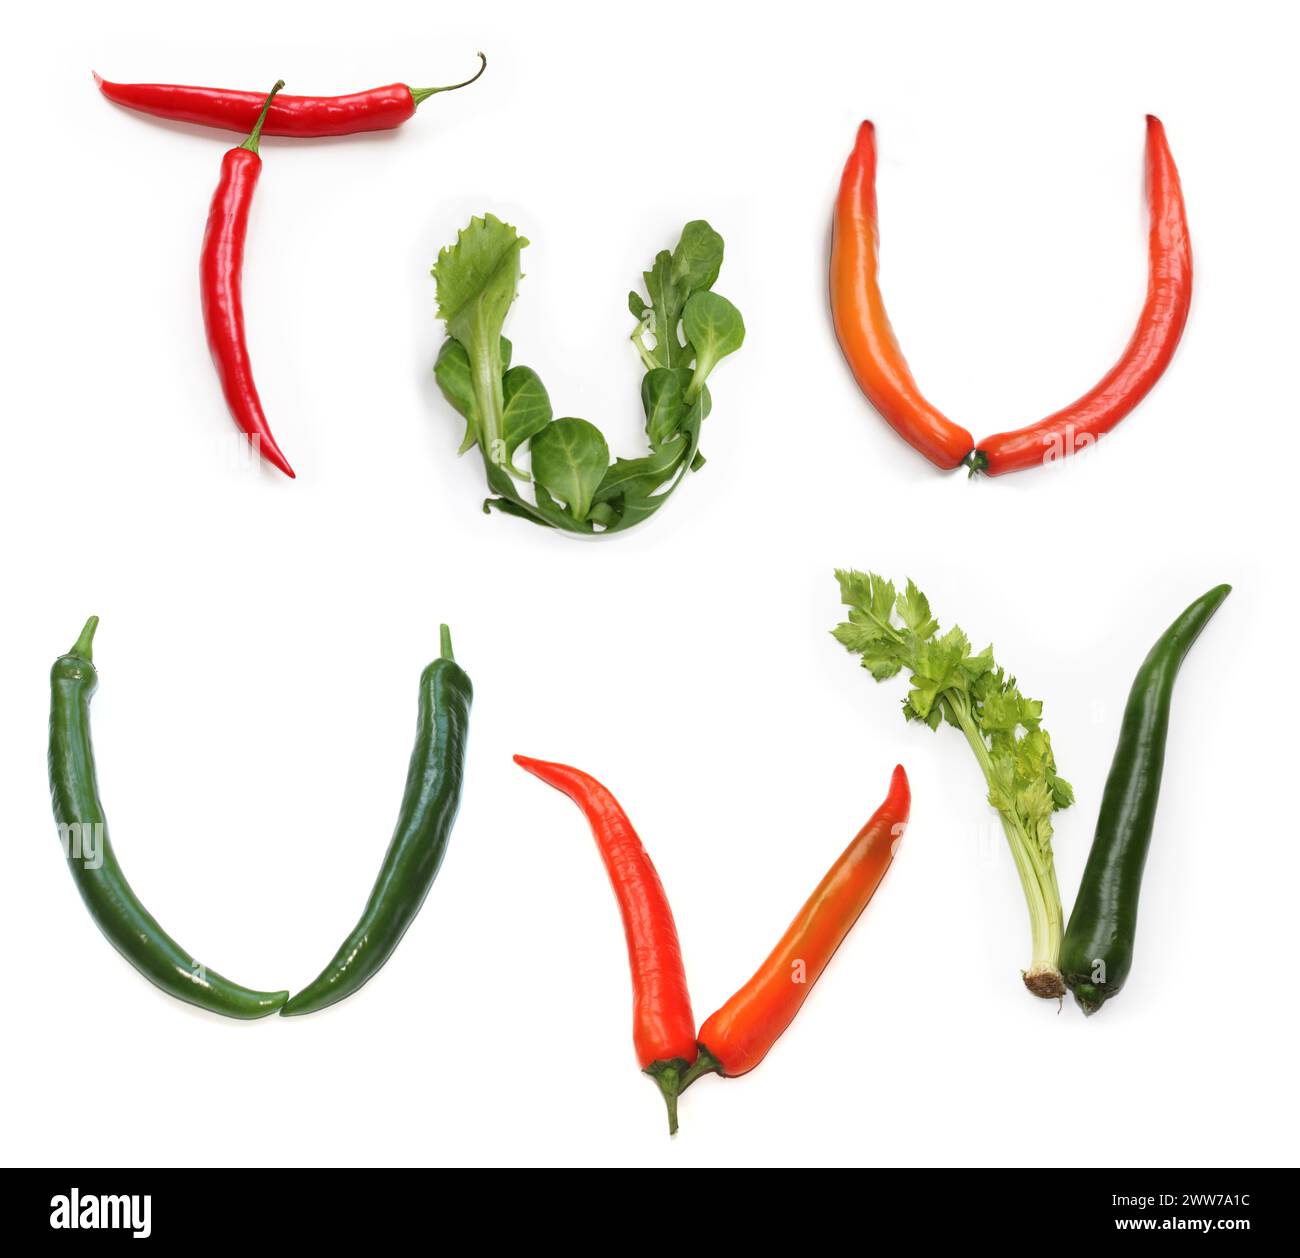 Letters t u v made from chili pepper, red, green chilies, salad lettuce leaf capital letters made of vegetables lettuce, for menu card text, cook book Stock Photo